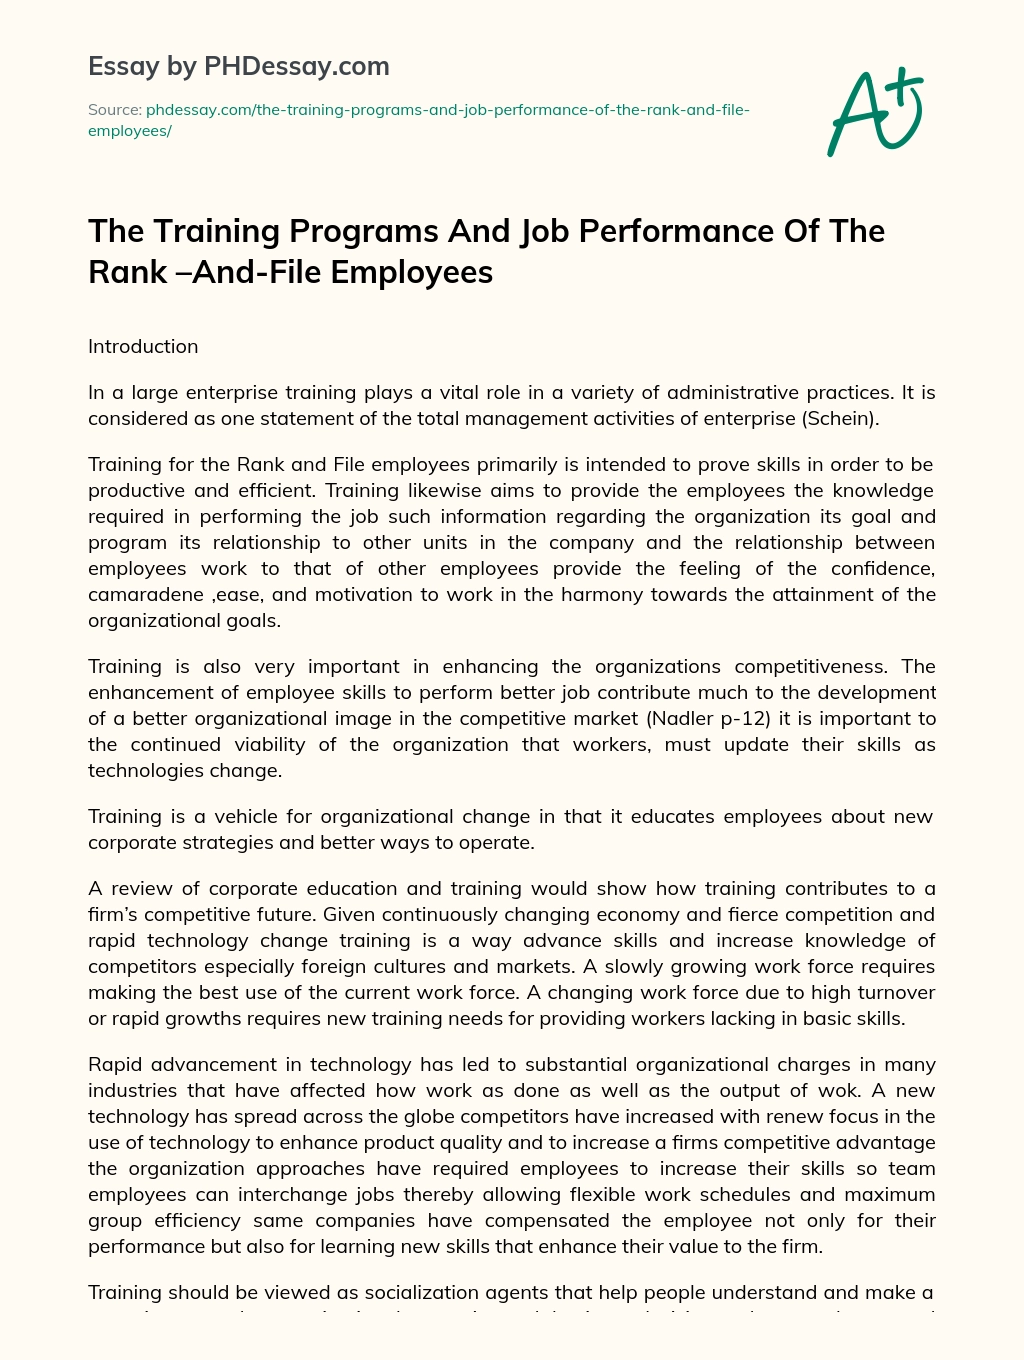 The Training Programs And Job Performance Of The Rank –And-File Employees essay